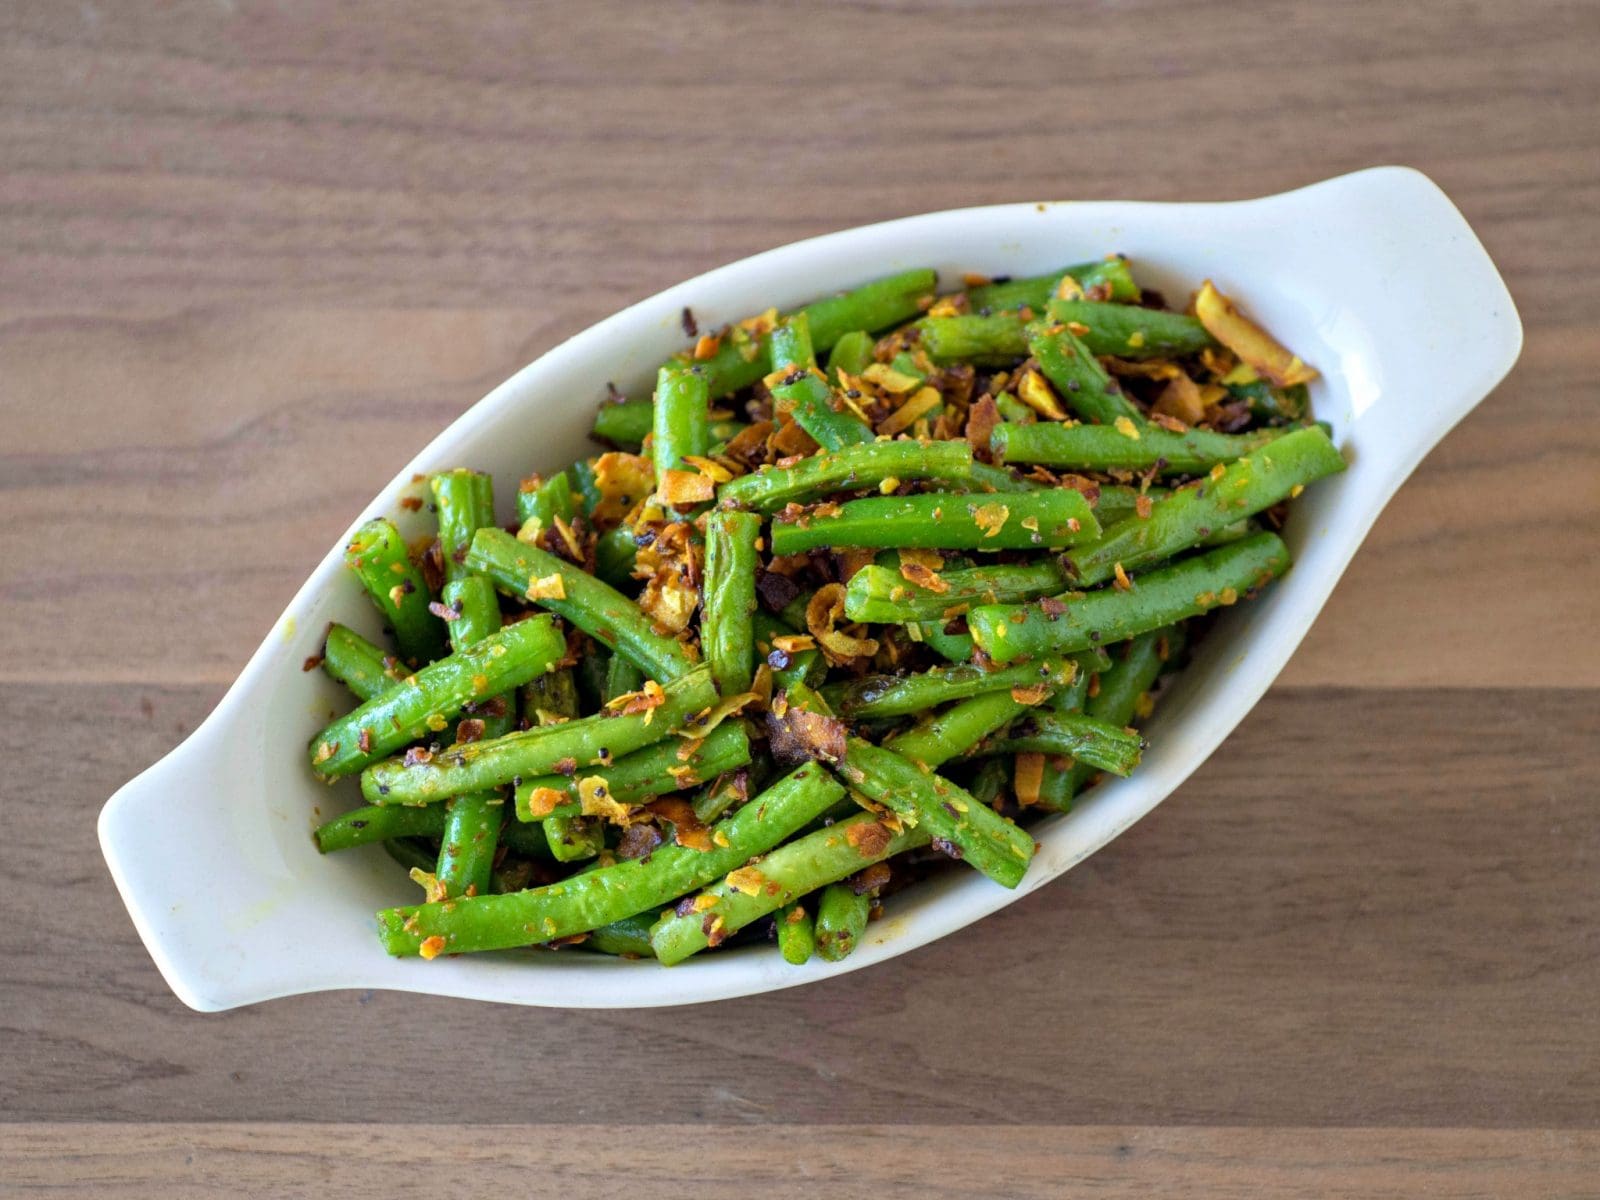 Green beans sauteed in a white bowl on a wooden table.